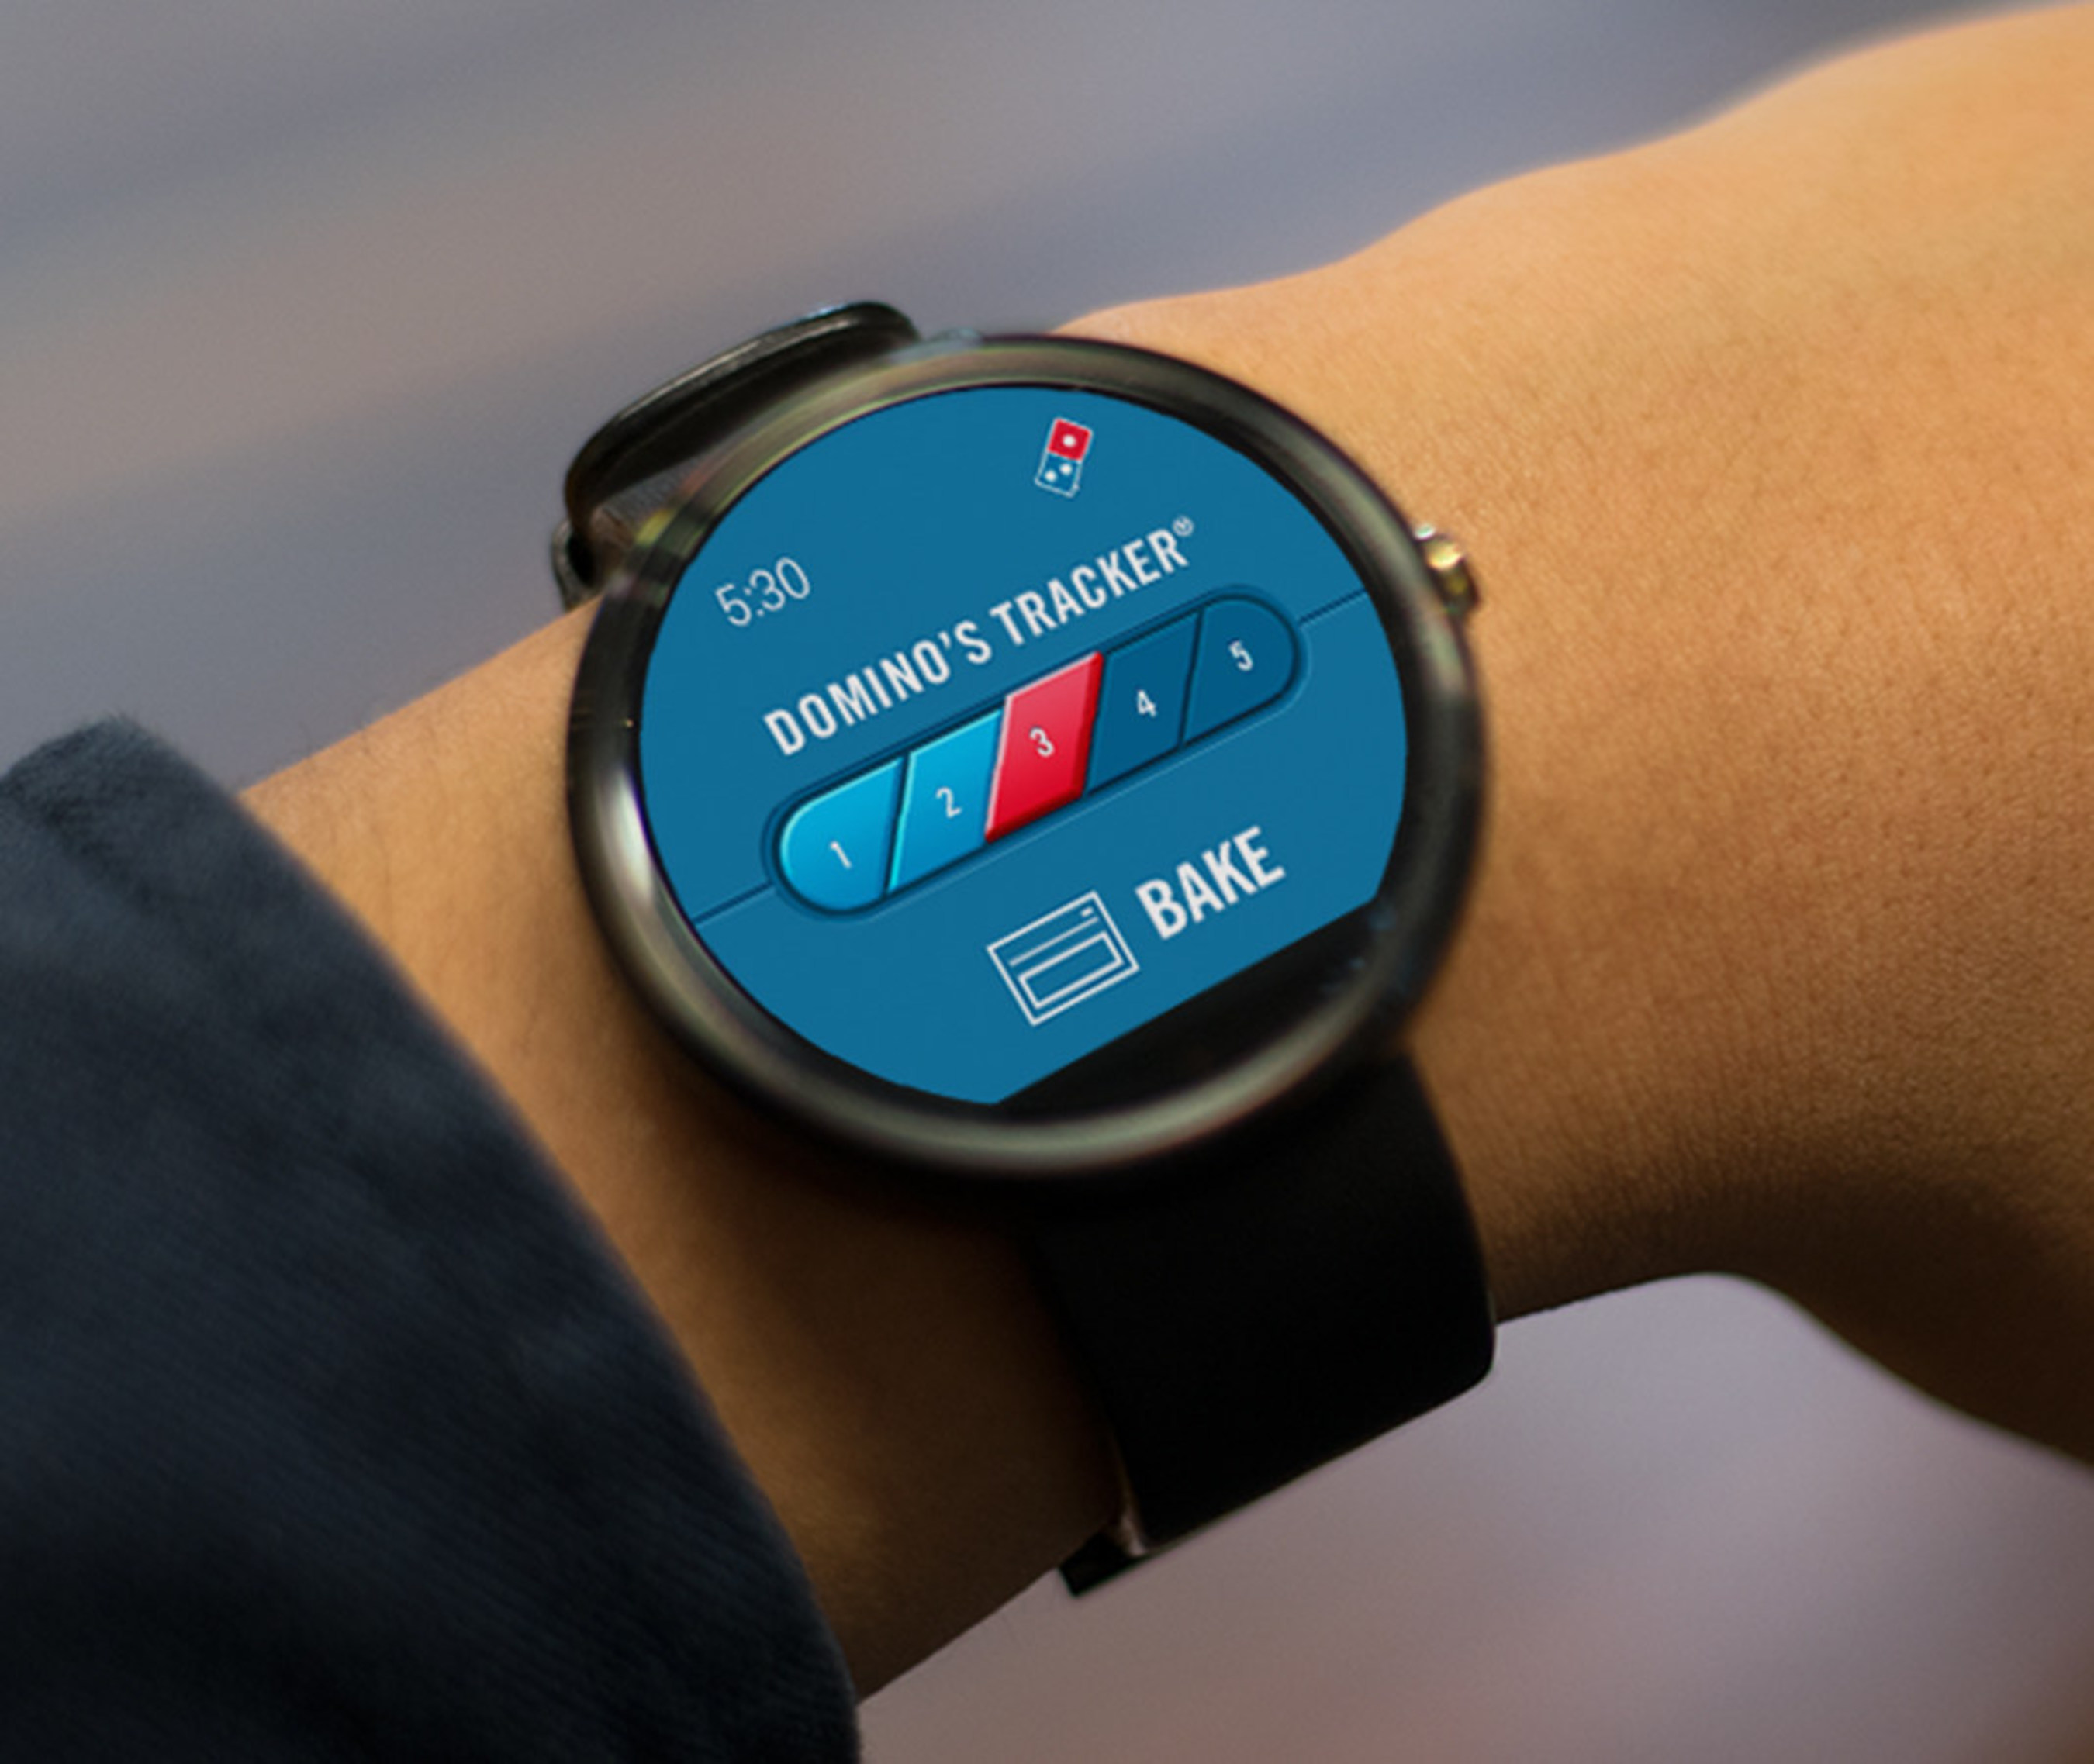 Domino's customers can now track and place their order on Android Wear (pictured) and Pebble smartwatches.